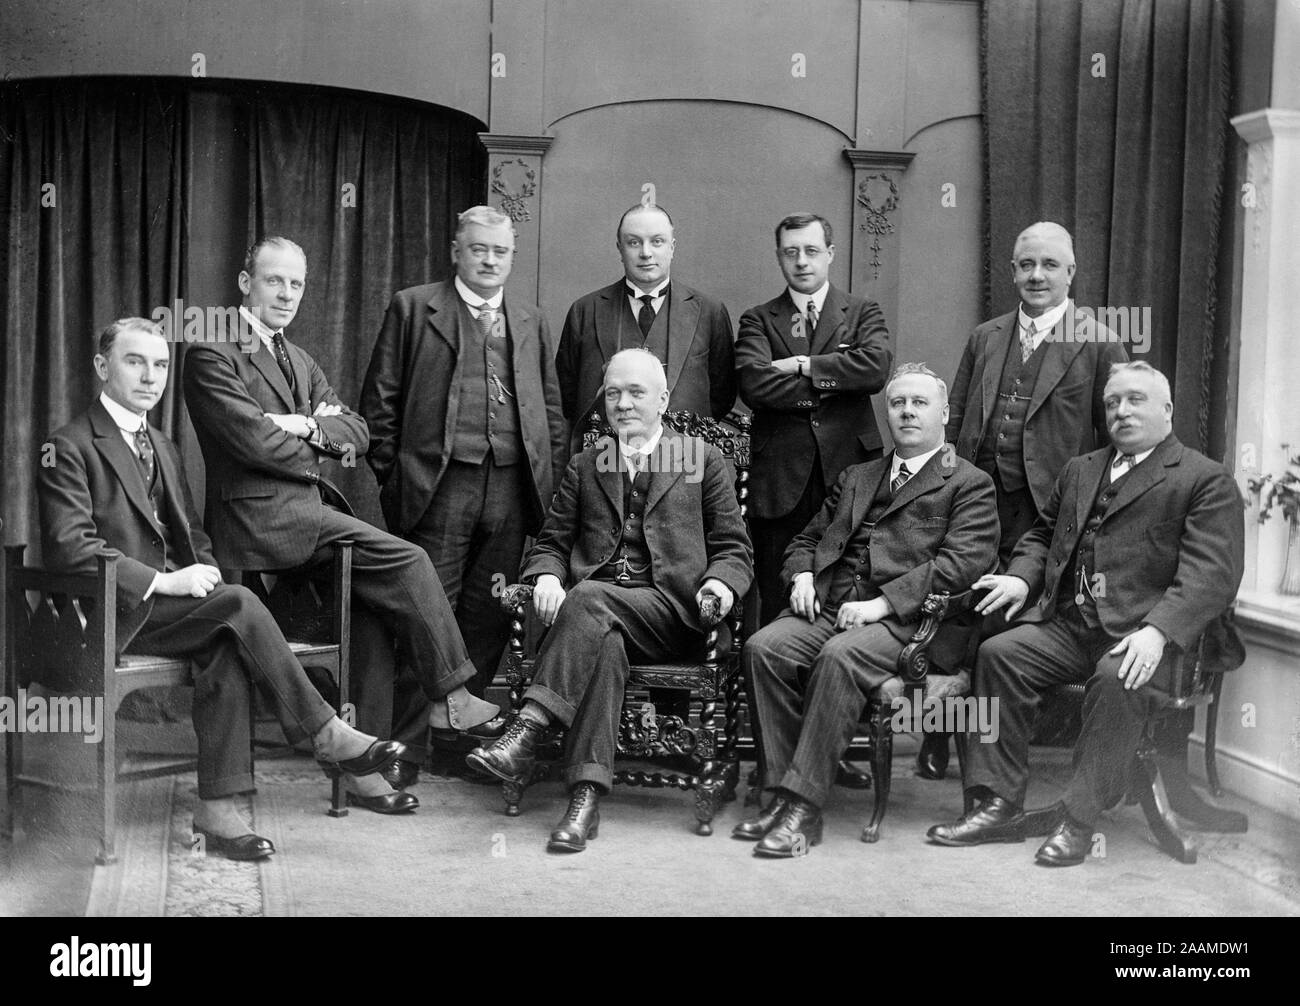 An early Edwardian English vintage black and white photograph showing a group of men, some seated, some standing, indoors. Shows the fashion of the period. Stock Photo